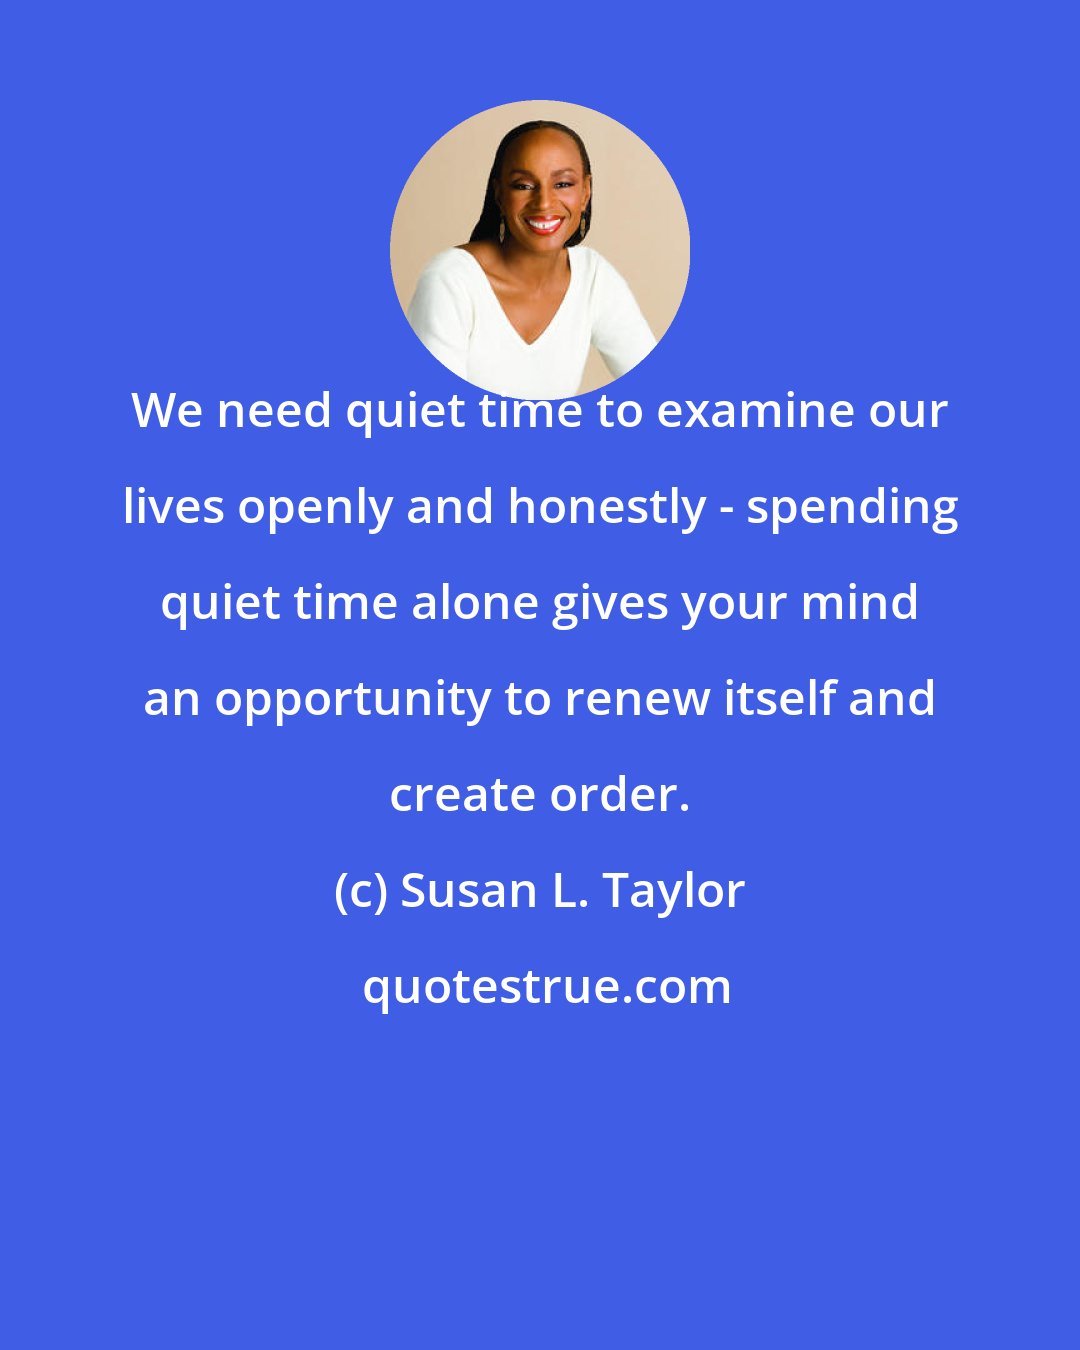 Susan L. Taylor: We need quiet time to examine our lives openly and honestly - spending quiet time alone gives your mind an opportunity to renew itself and create order.